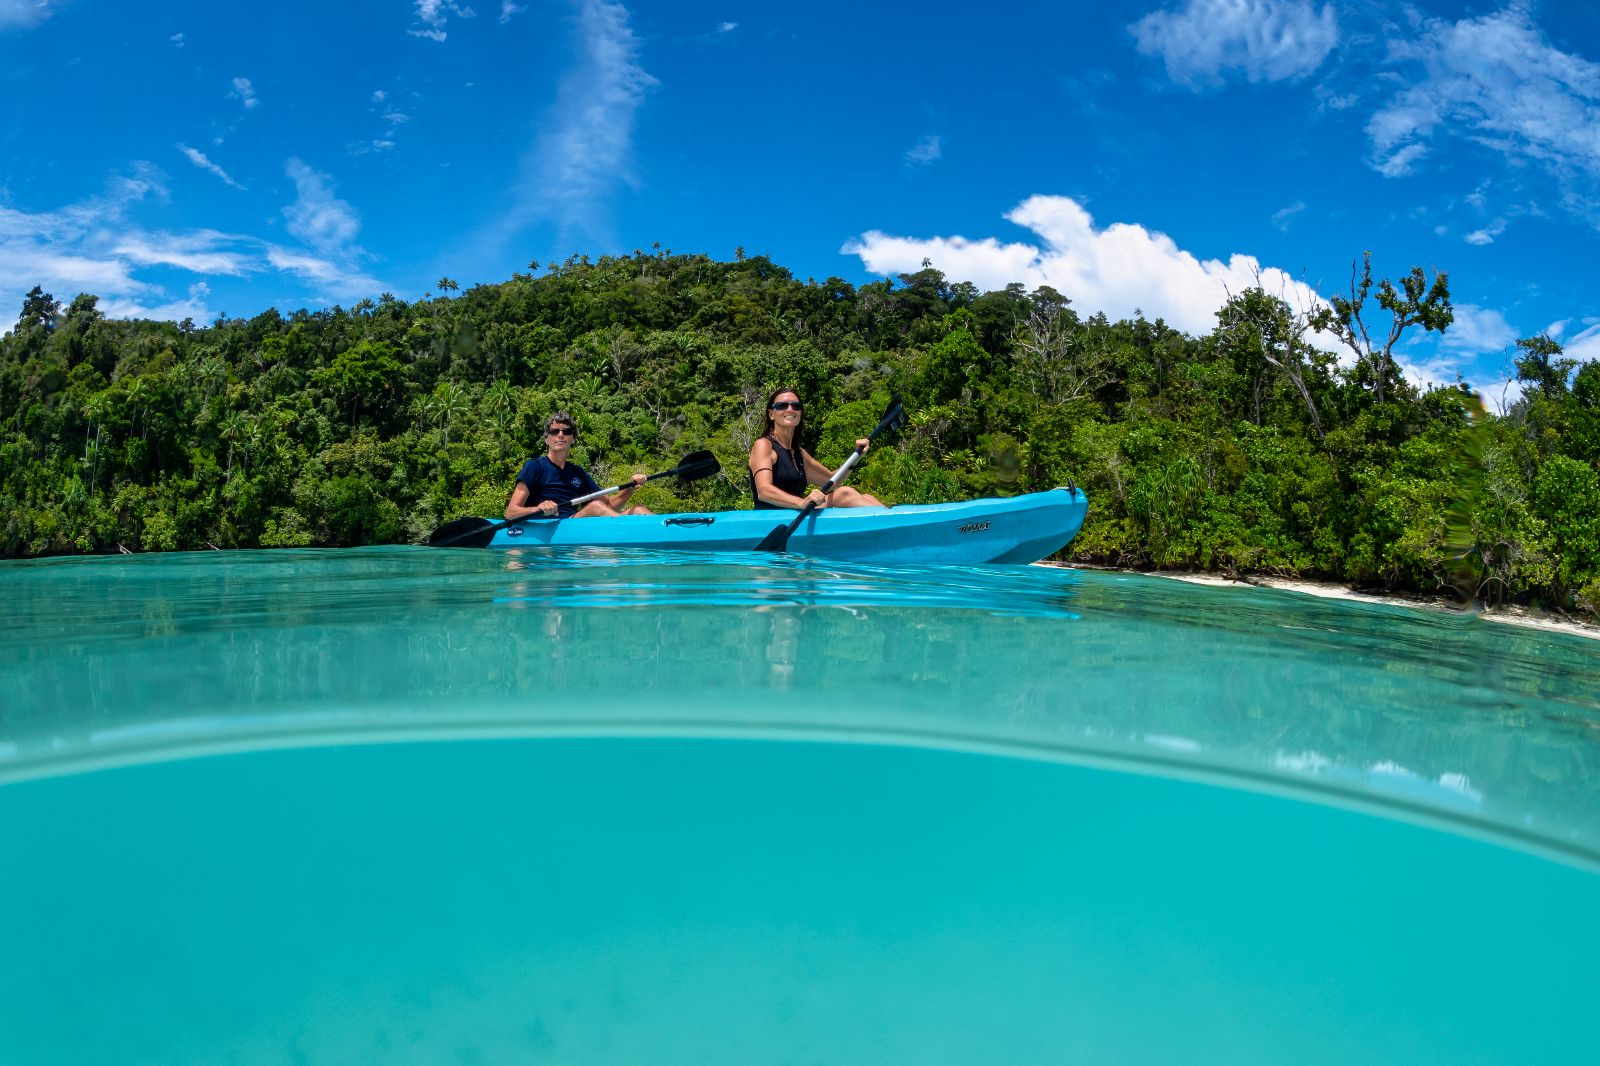 Kayaking in the waters of Indonesia from the Majik phinisi